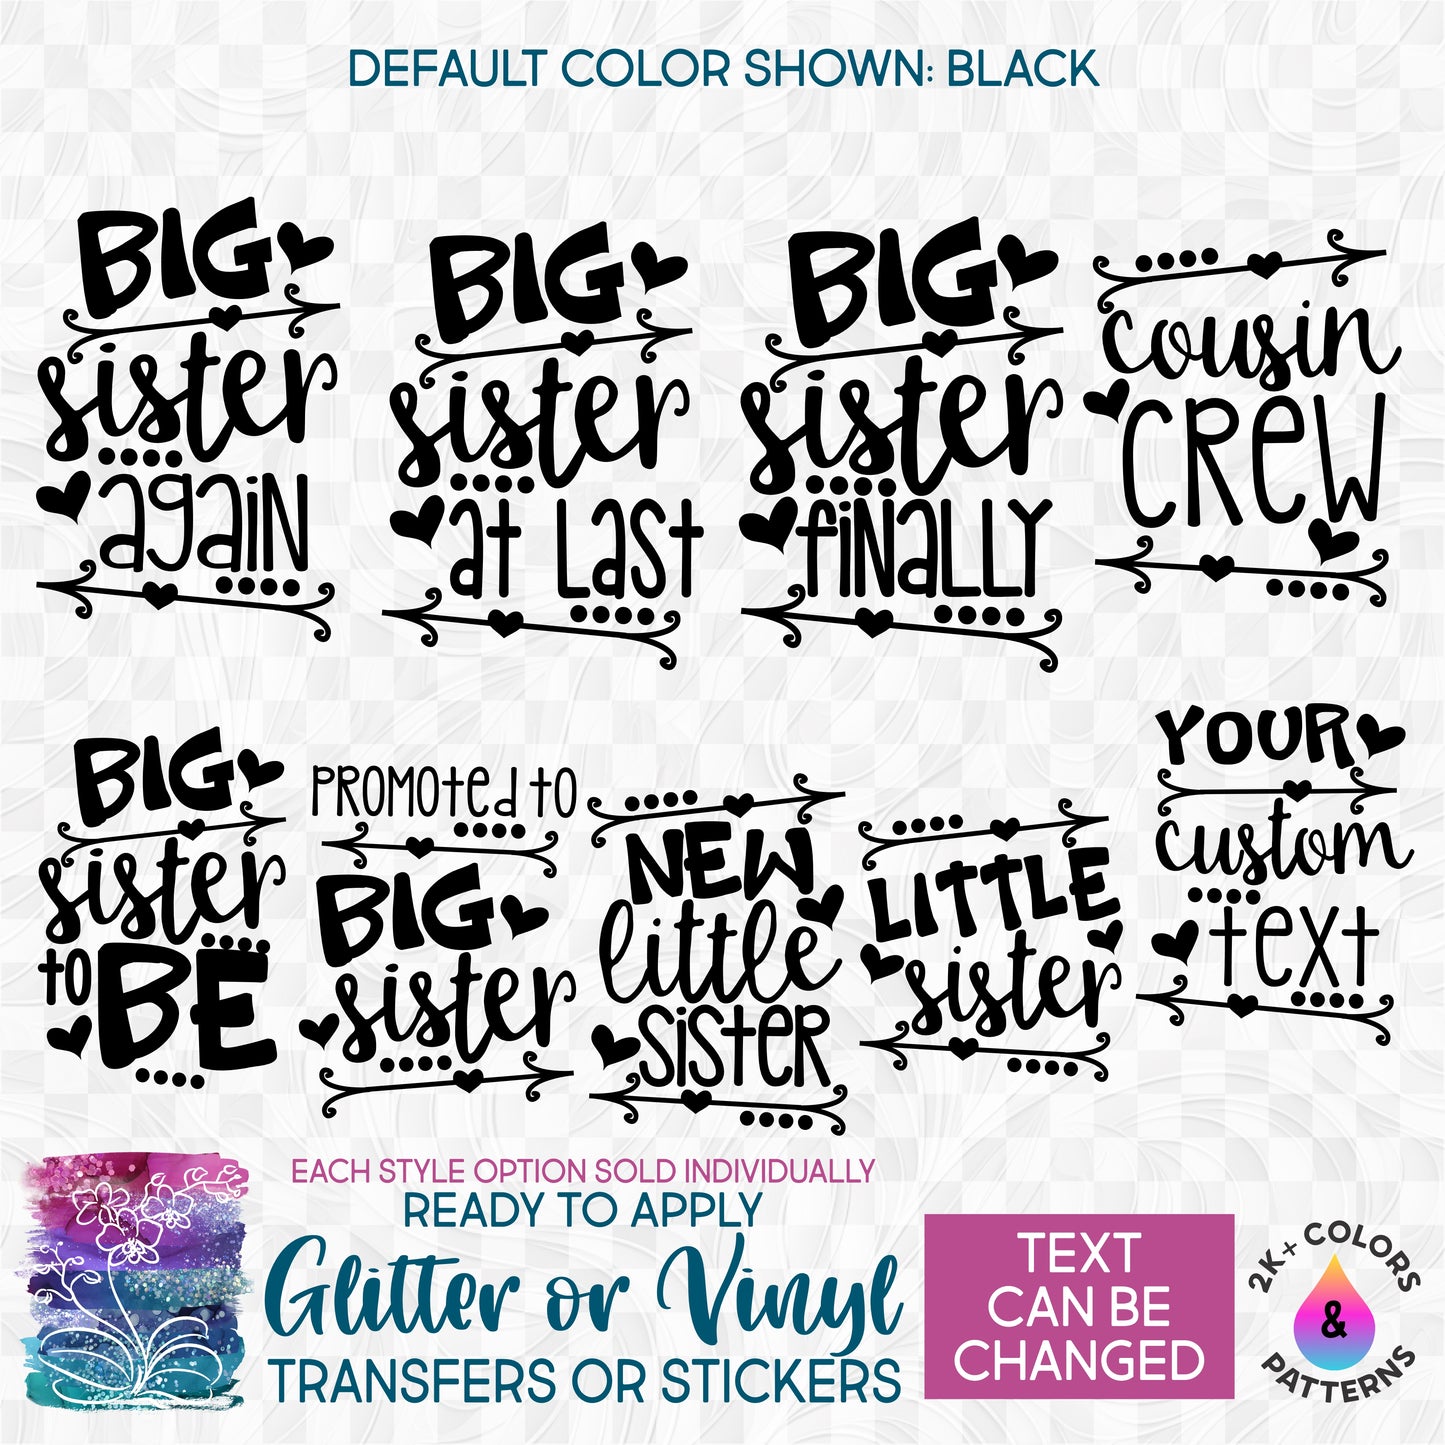 s122-U1 Big Sister Finally Again To Be New Little Sister Cousin Crew Custom Text Iron-On Transfer or Sticker